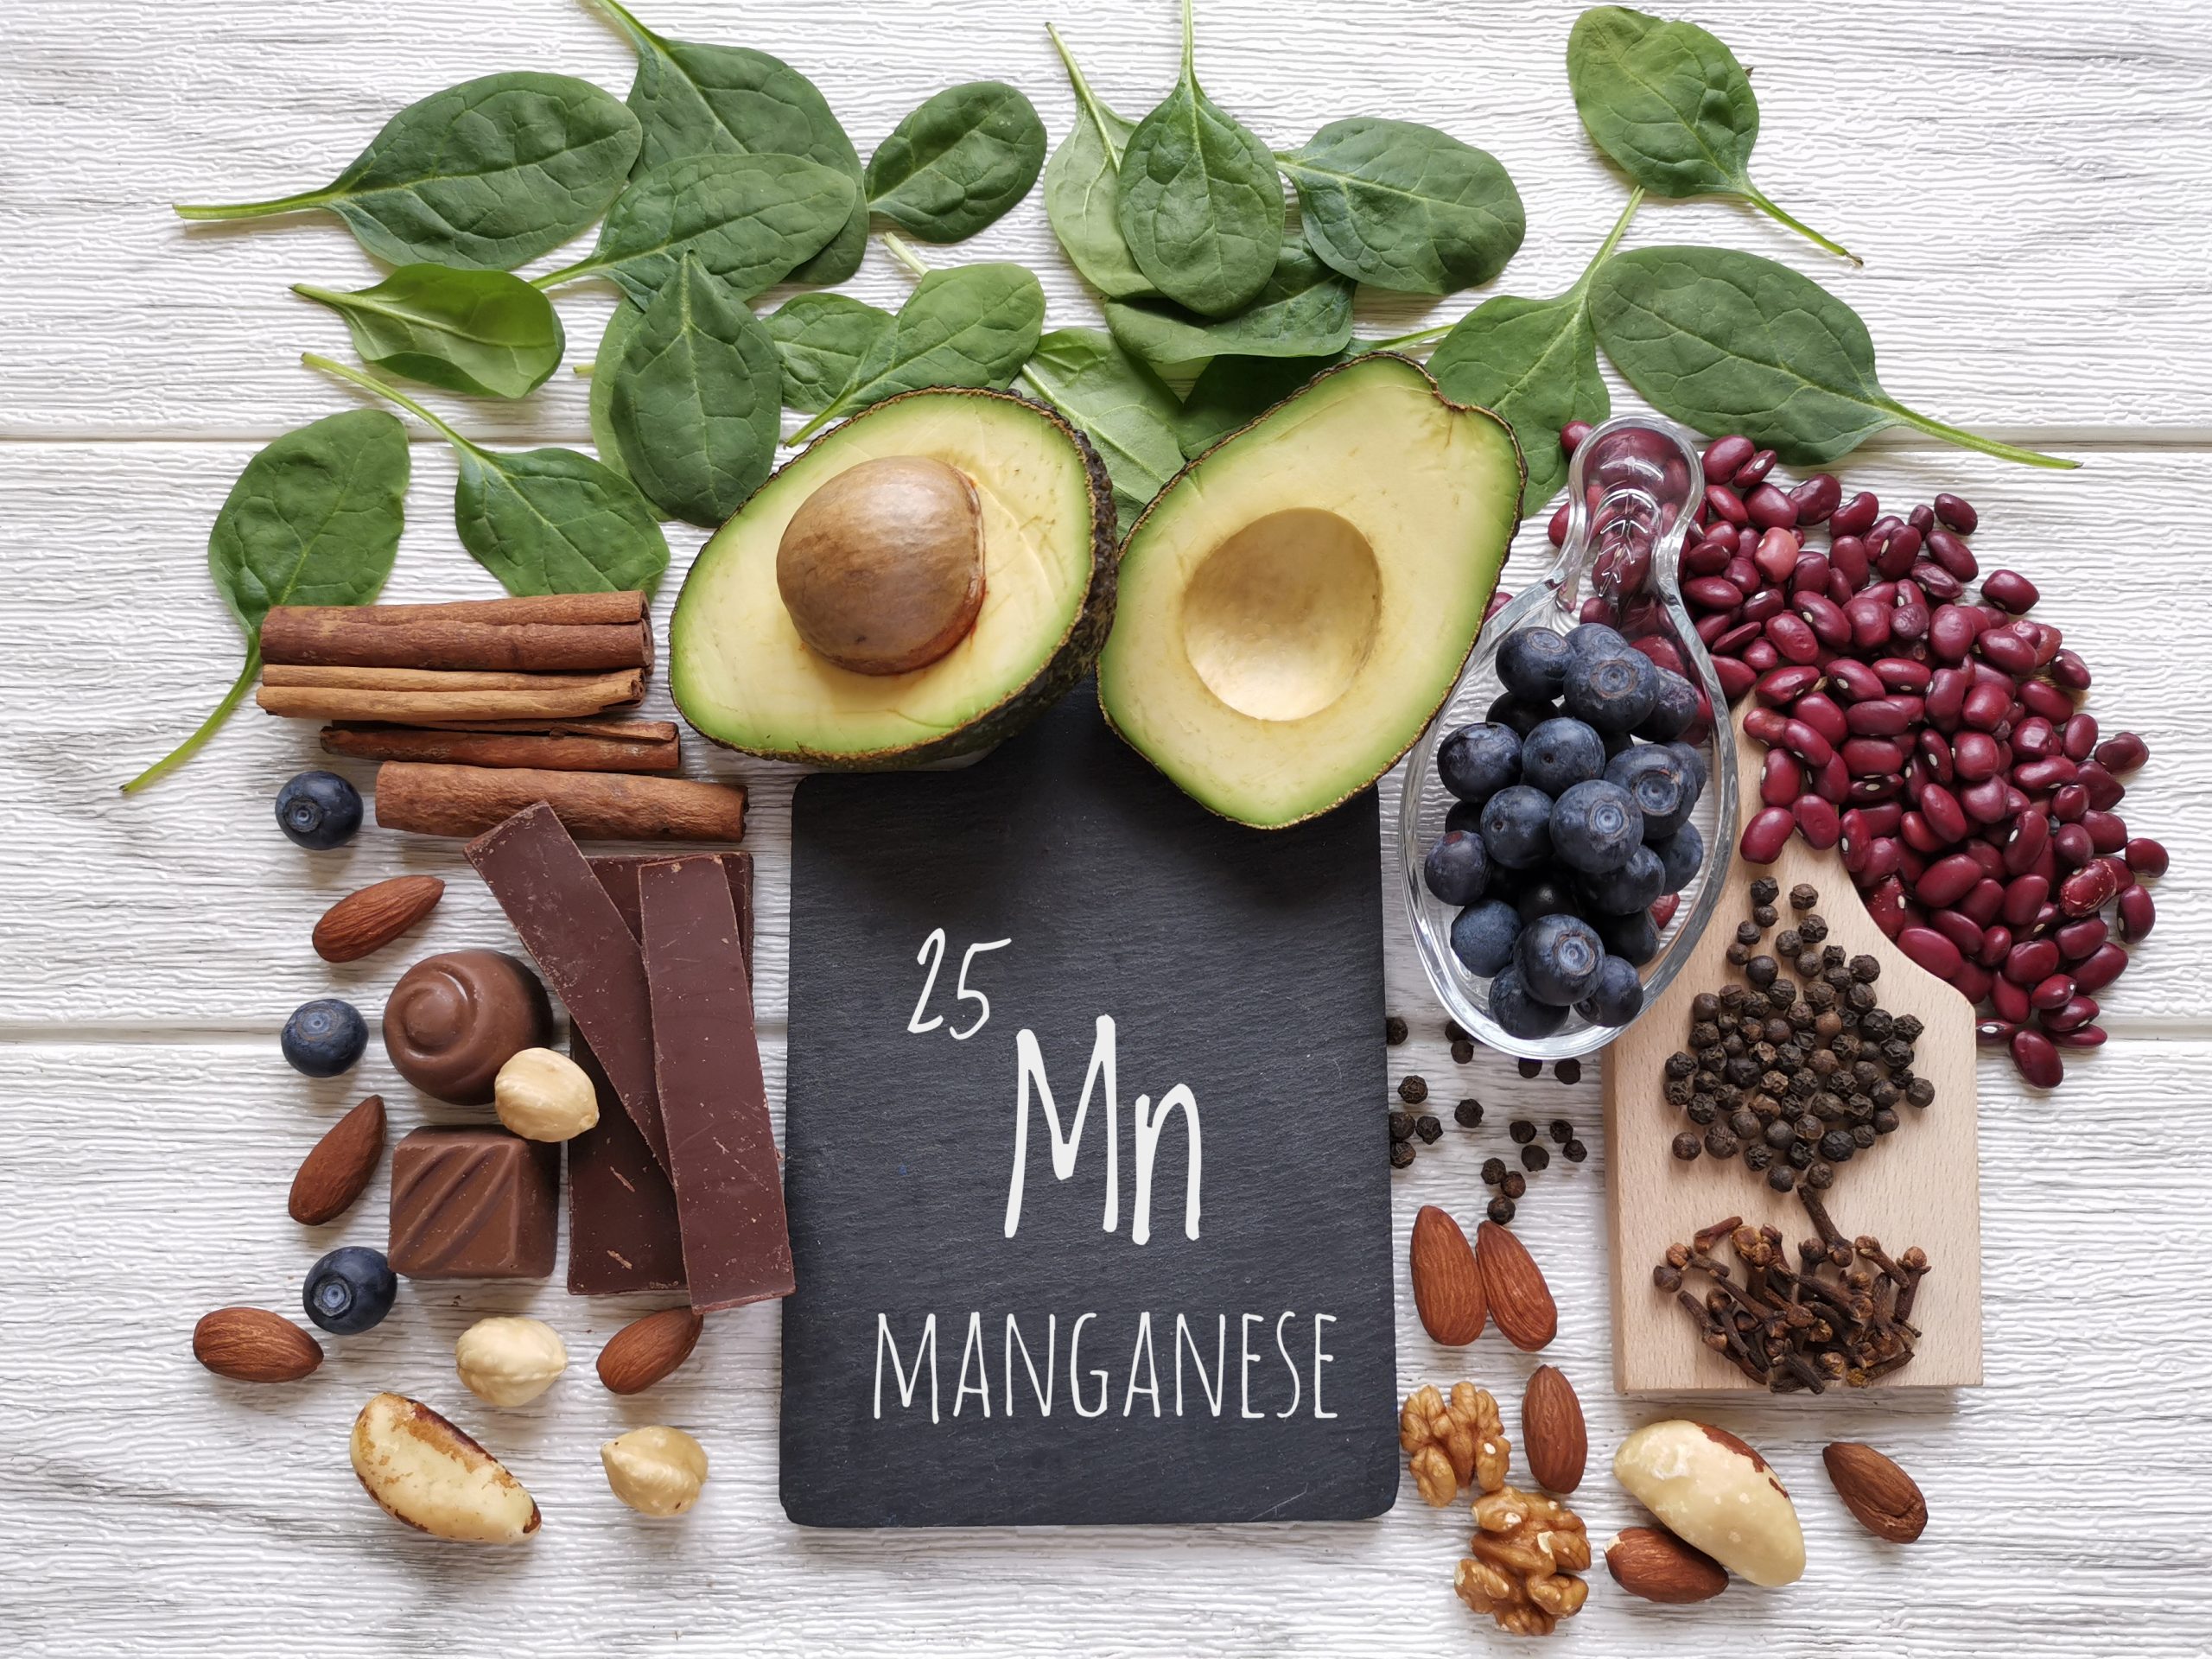 6-Health-Benefits-Of-Manganese-You-Should-Know-scaled-1.jpg